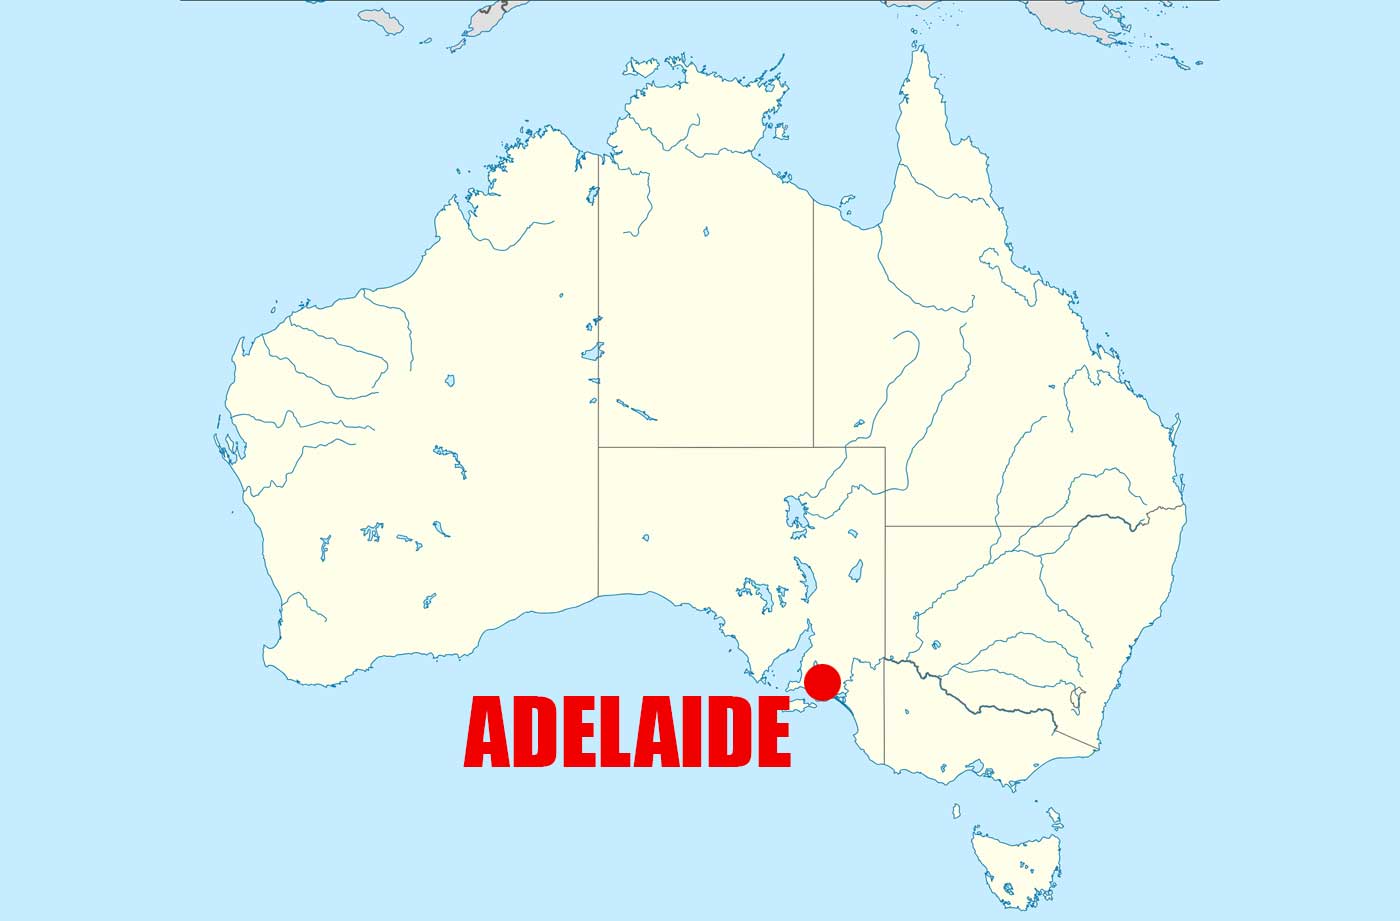 Location of Adelaide on Austraia Map